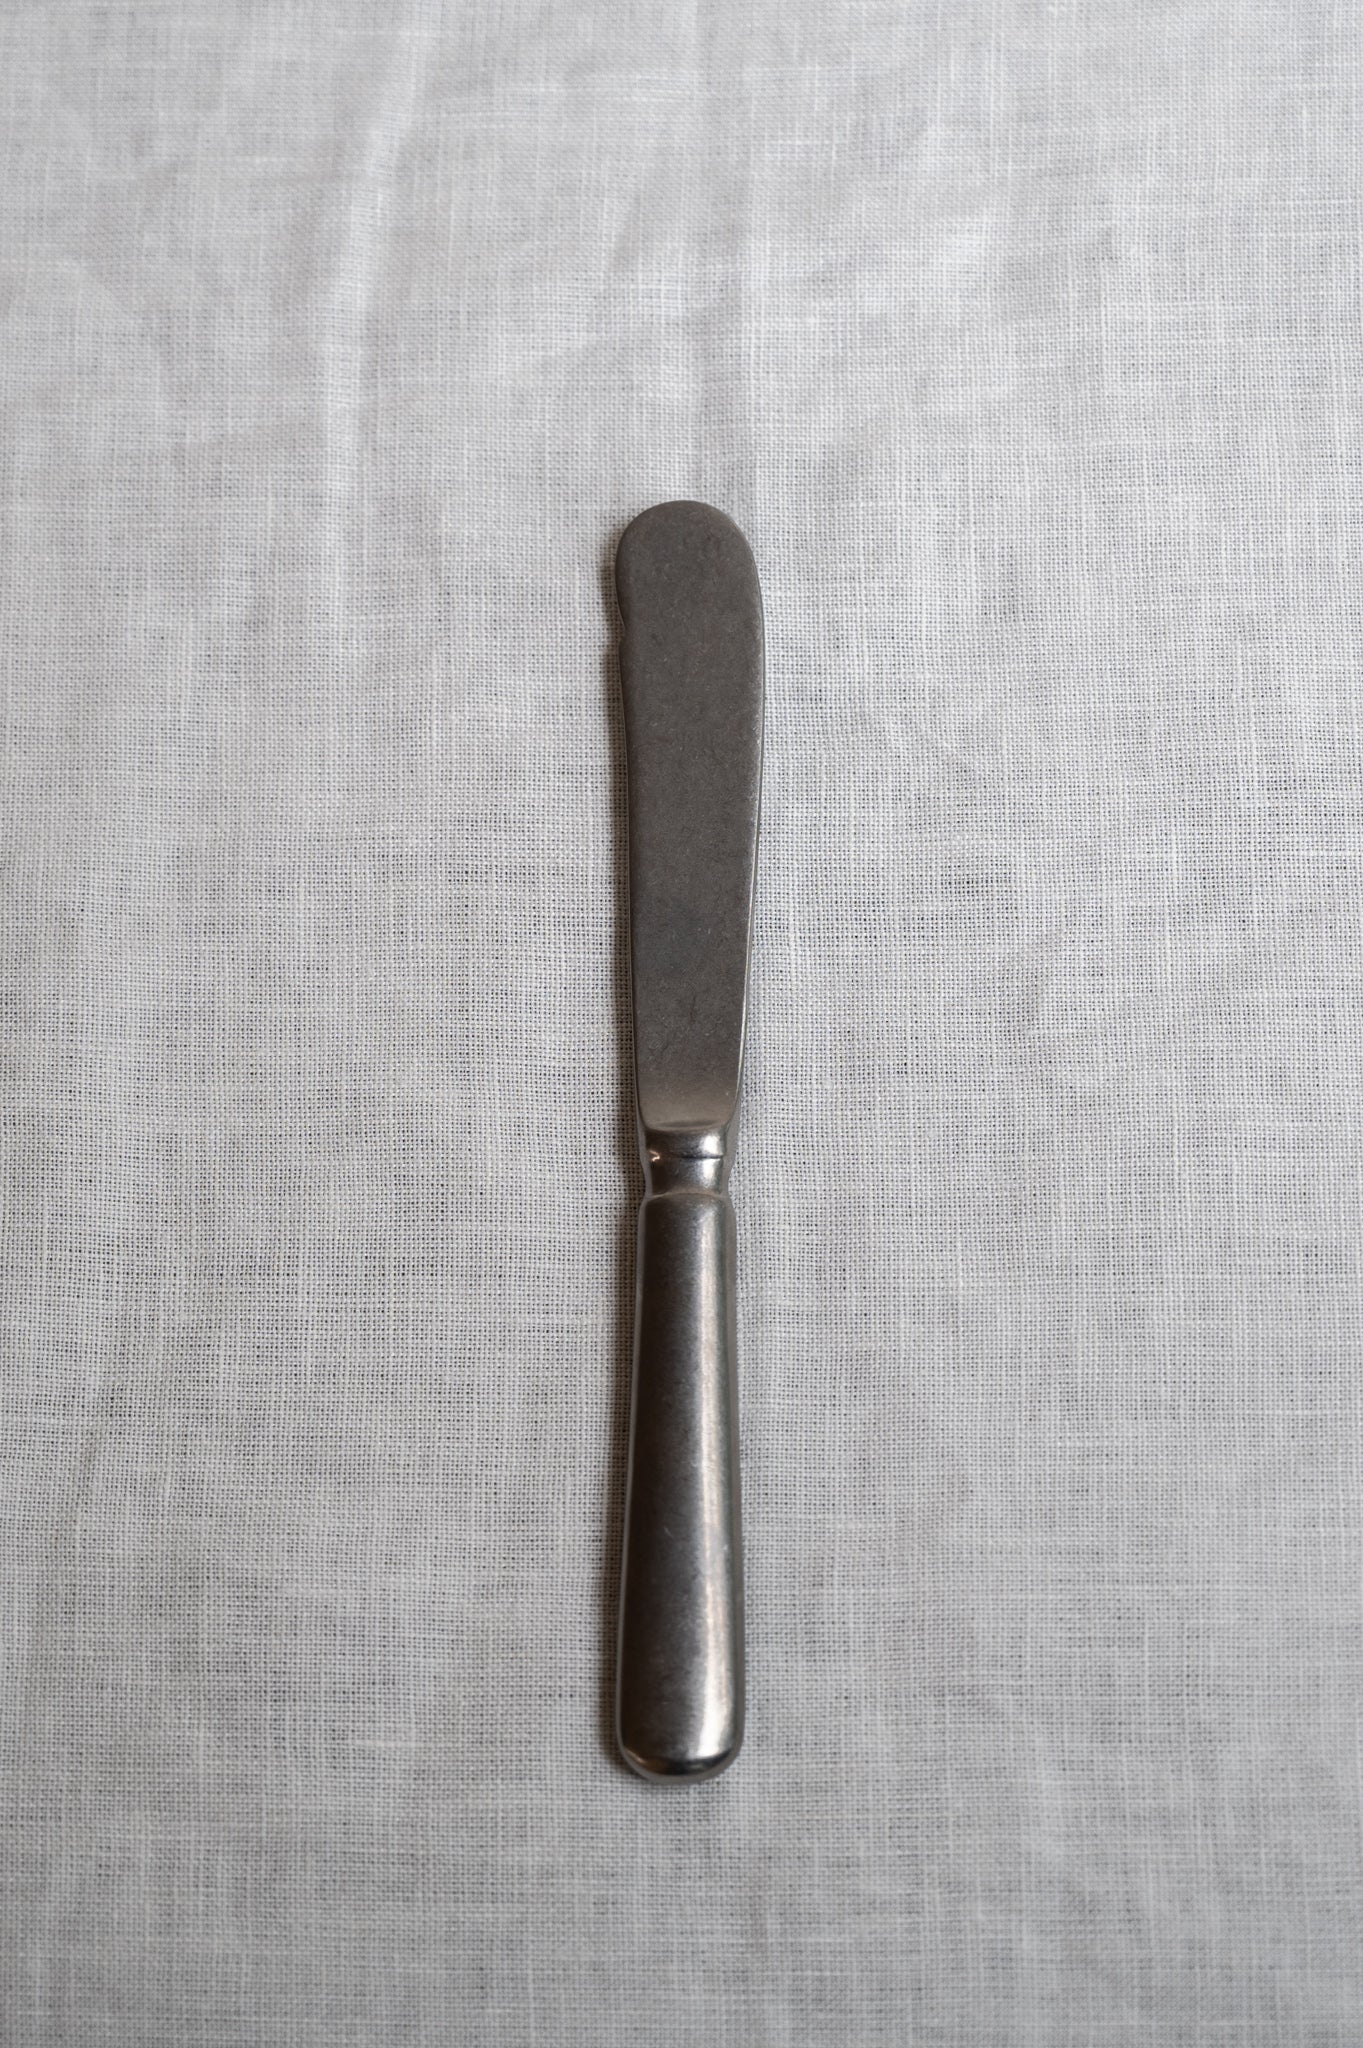 Butter Knife from the Baguette Vintage Serving Cutlery collection by Sambonet.